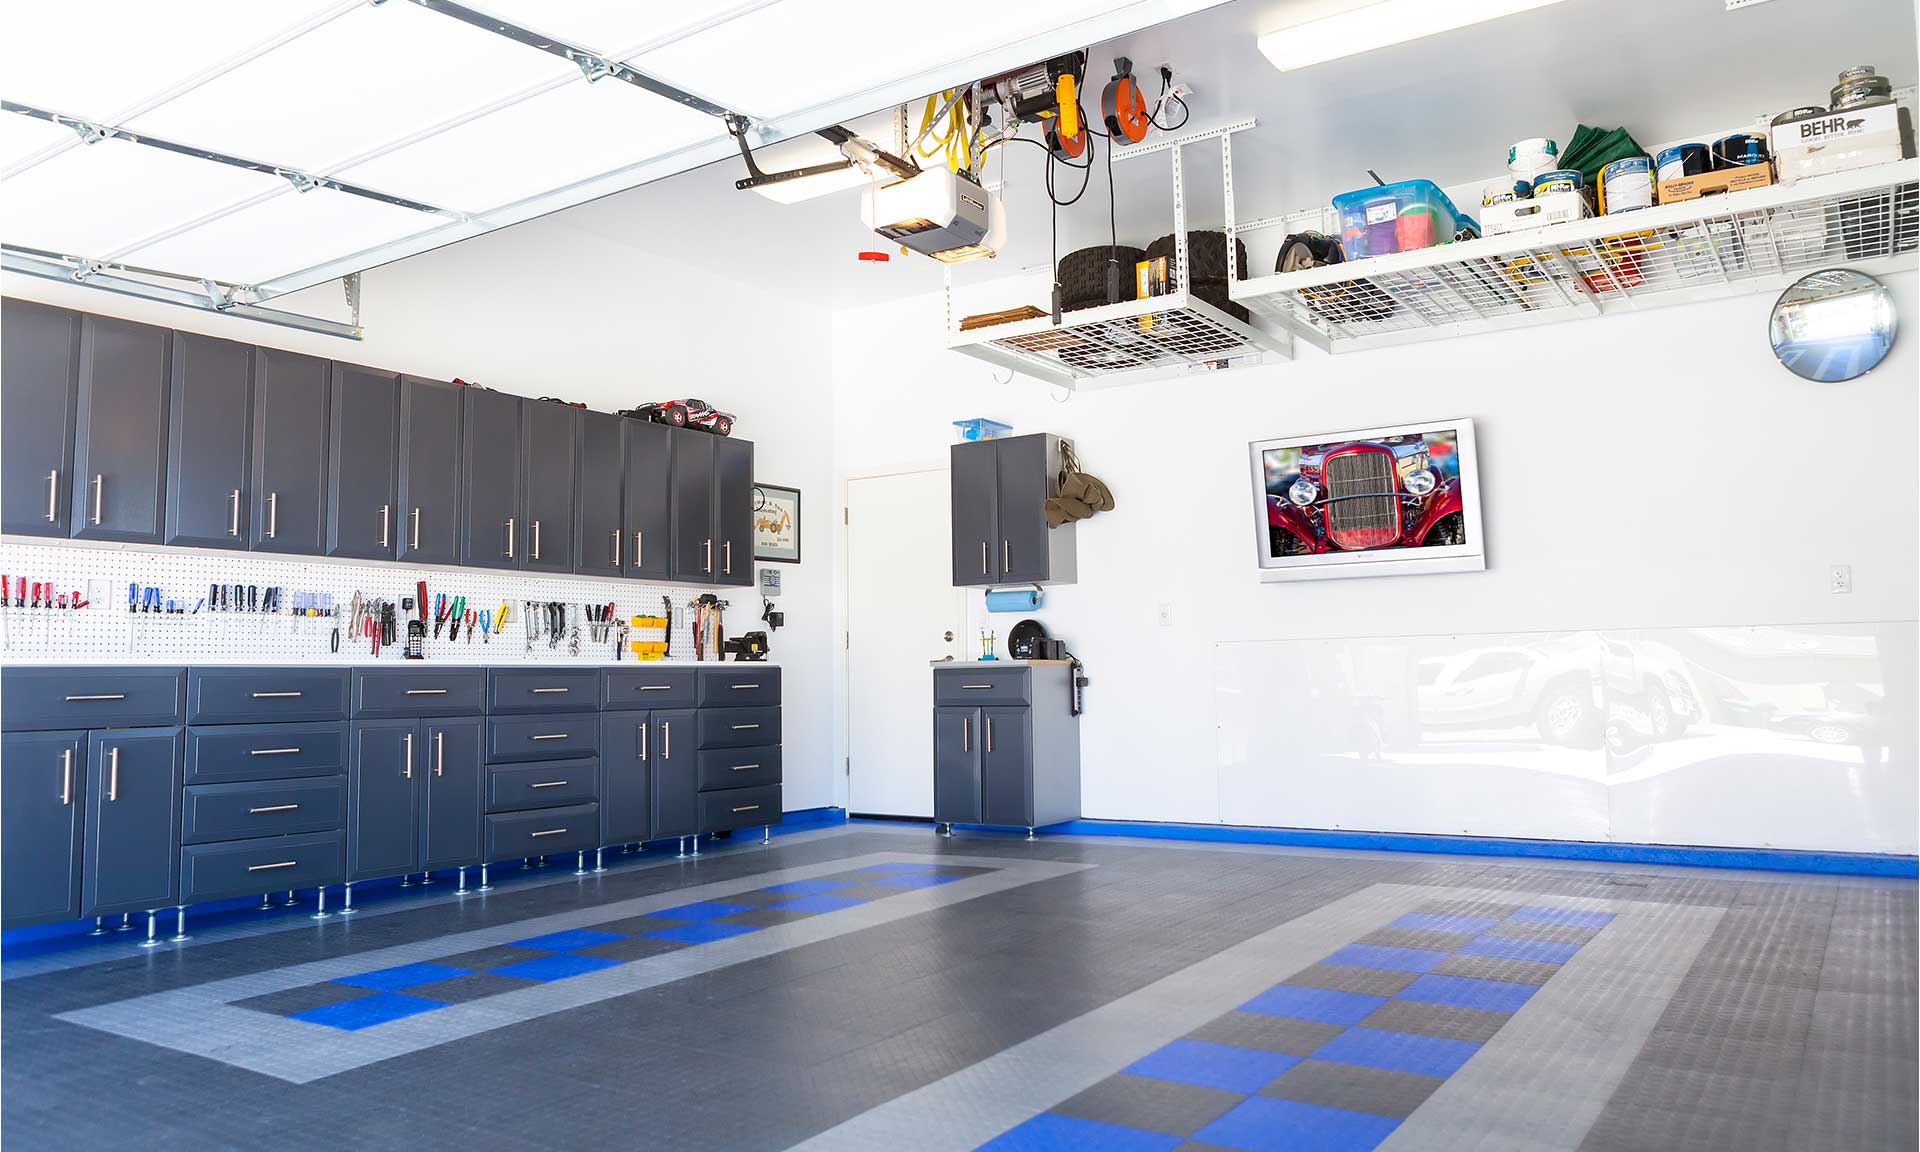 Garage Cleanup with storage containers and overhead storage rack